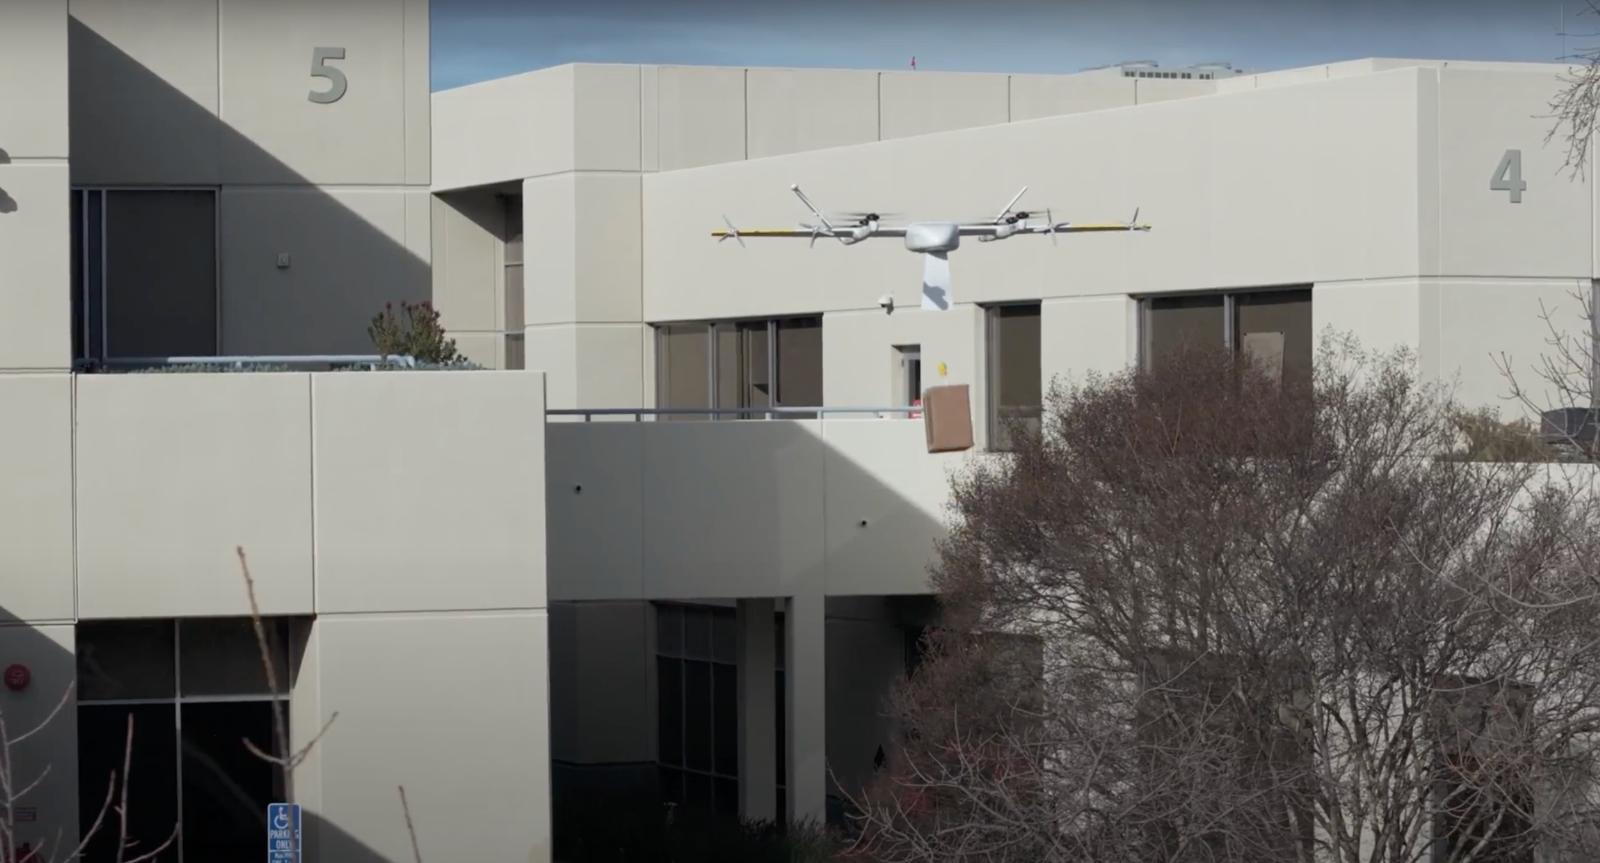 Alphabet’s Wing supersizes delivery drones to tow big orders